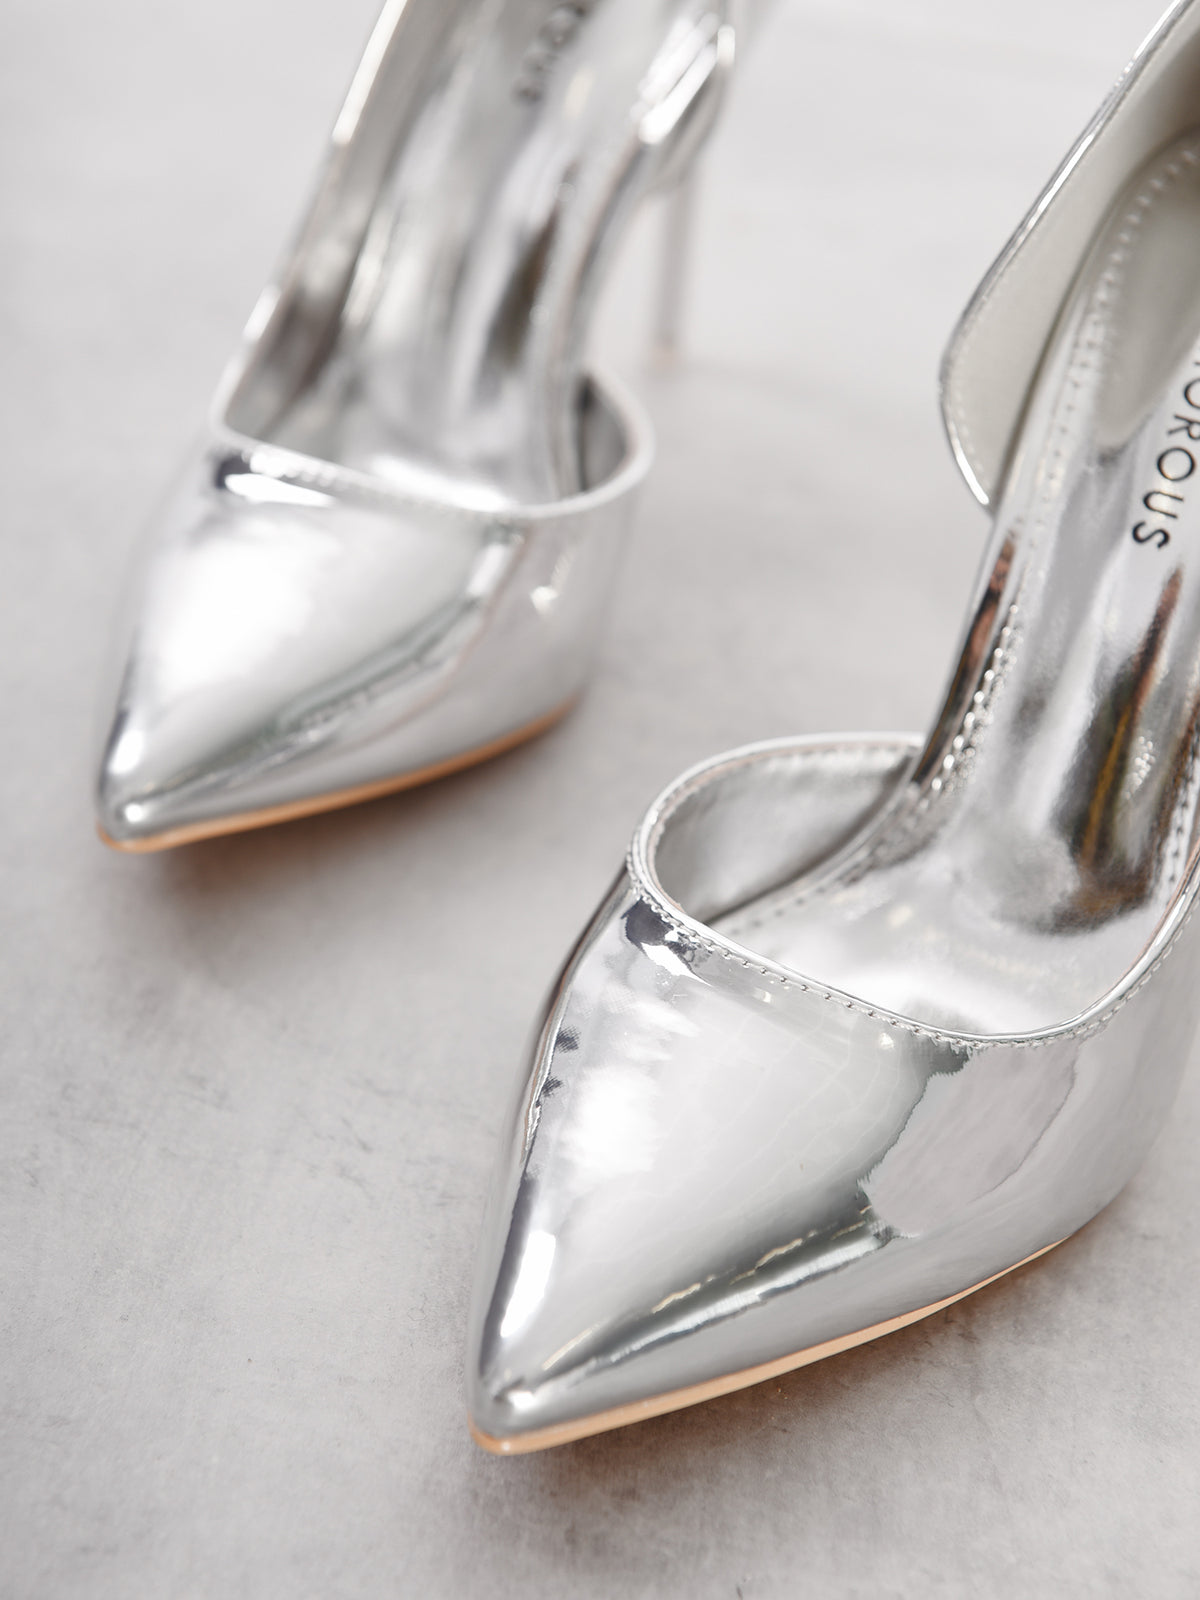 Silver Pointed Court Shoes